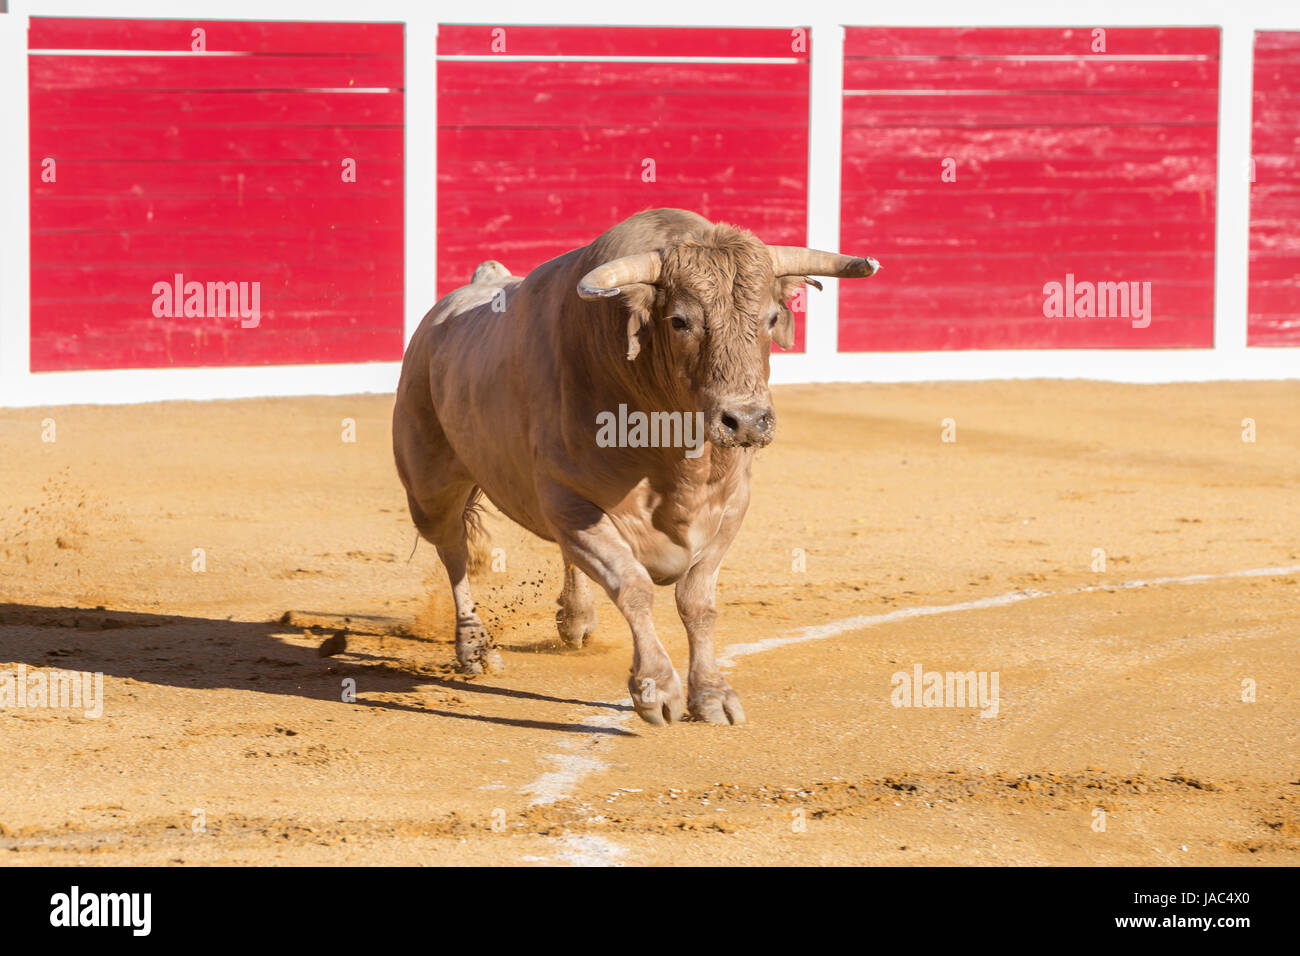 Sabiote, Spain - August 23, 2014: Capture of the figure of a brave bull in a bullfight, Sabiote, Spain Stock Photo